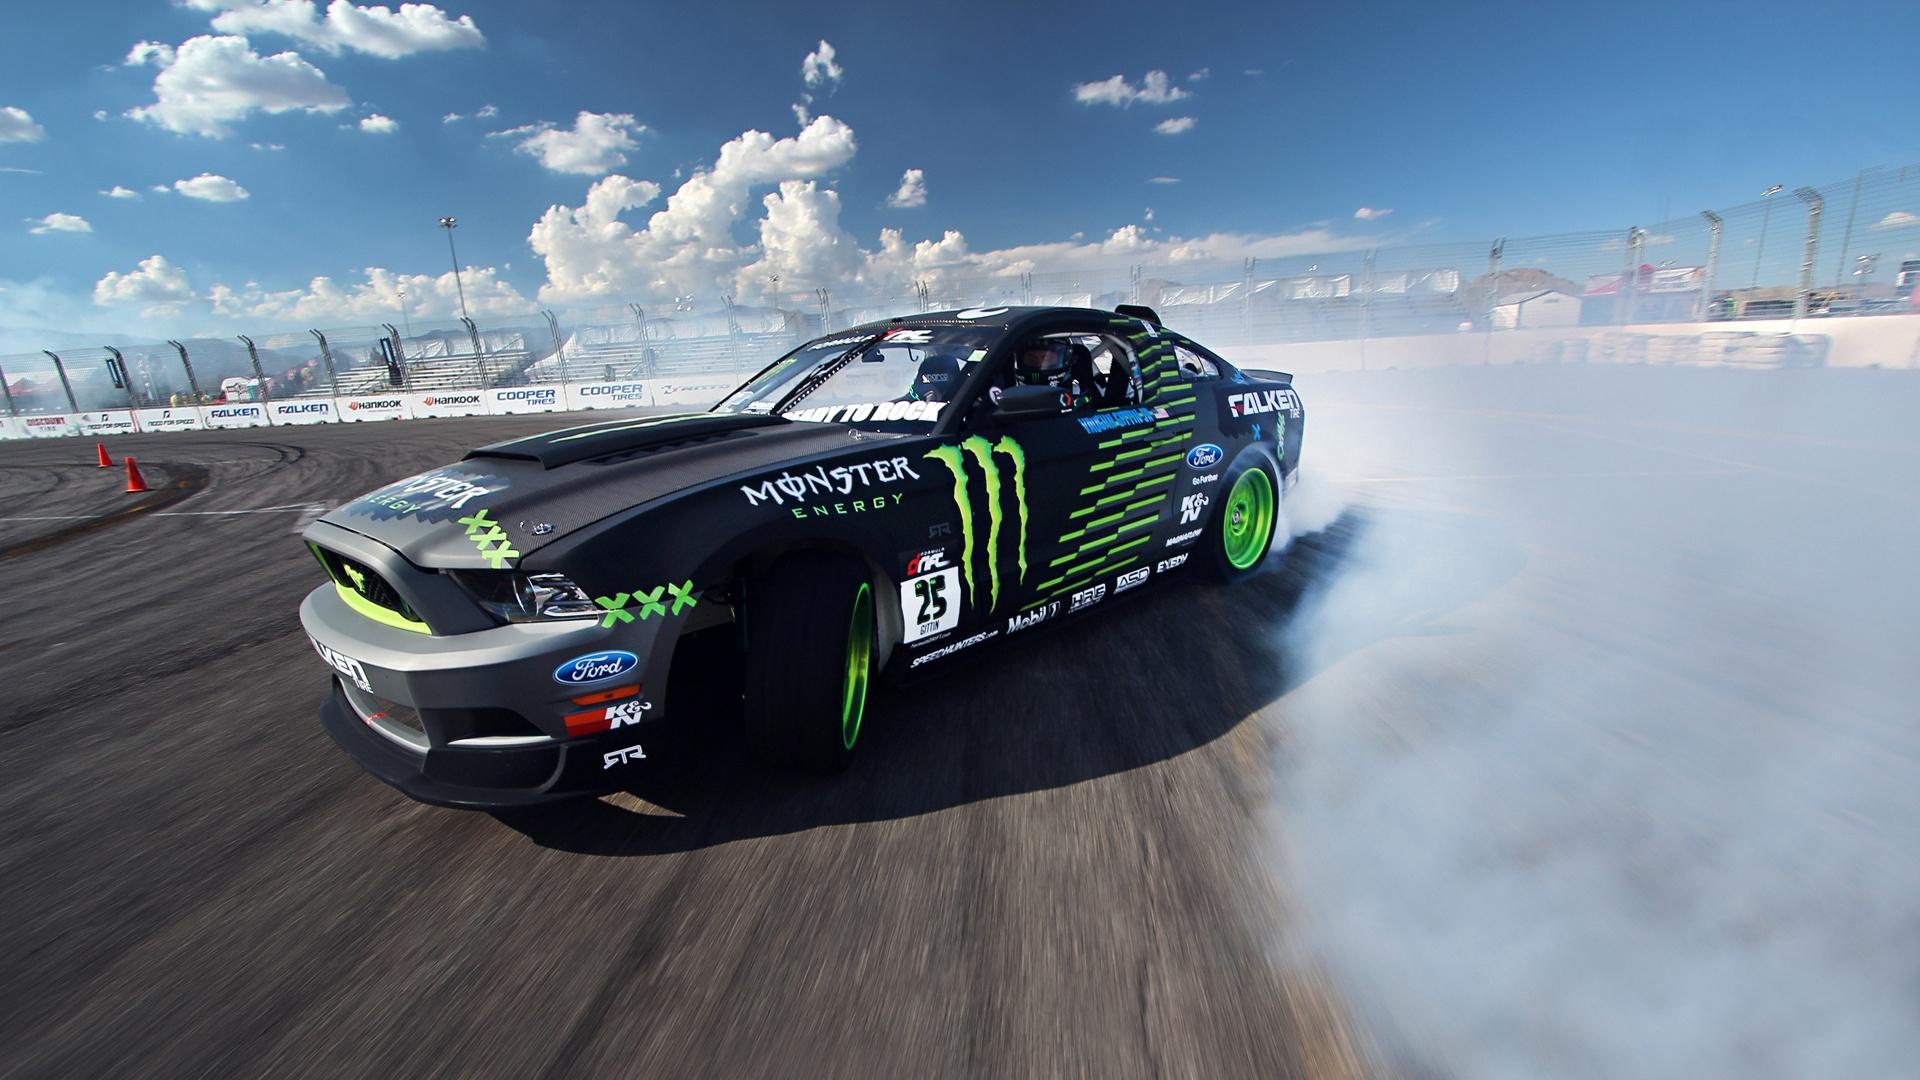 Download wallpaper 1920x1080 competition, drift, sports car, mustang